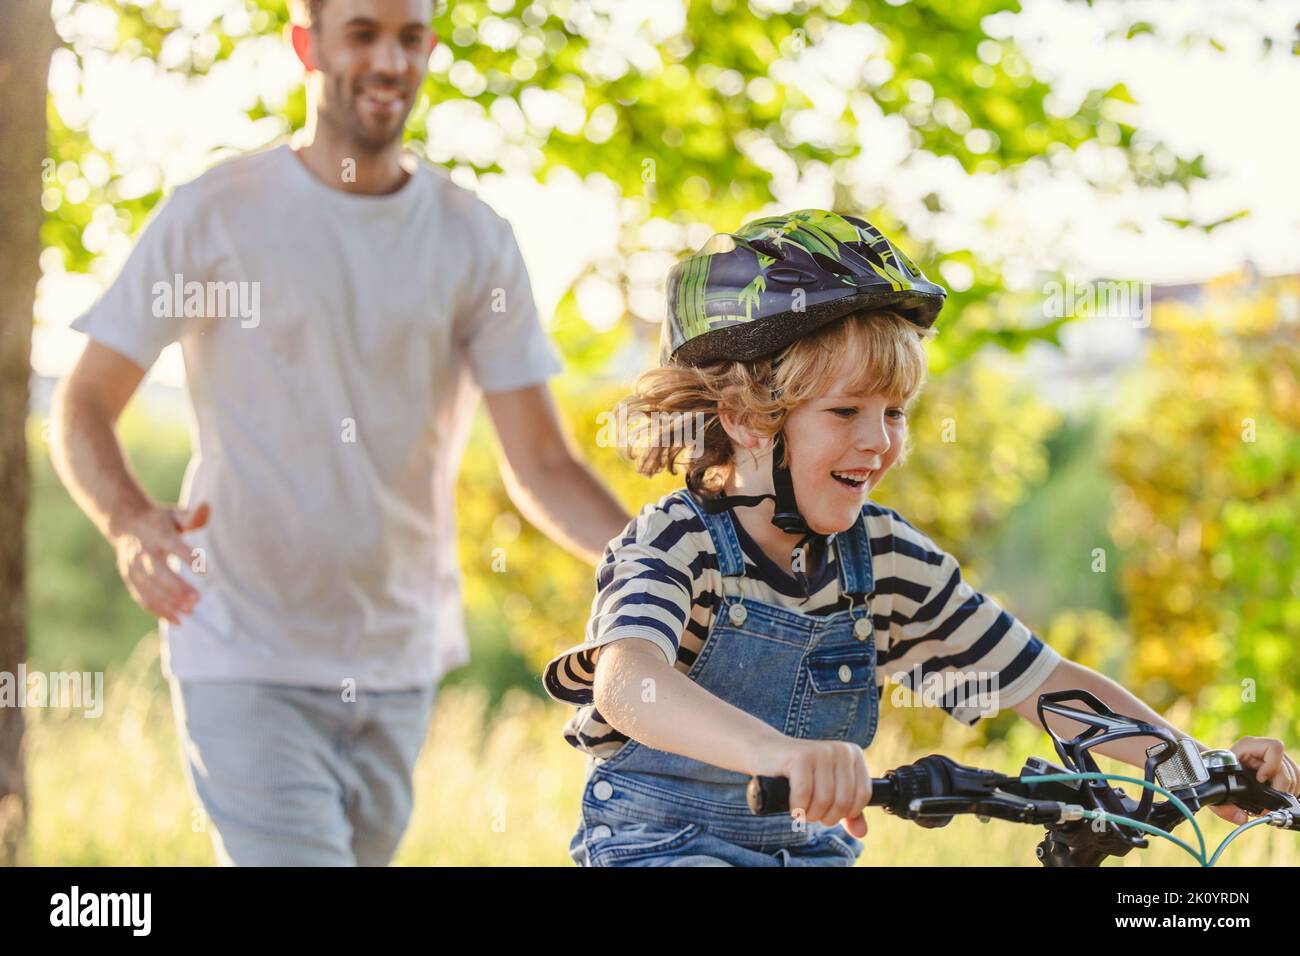 Father teaching his son how to ride a bicycle Stock Photo